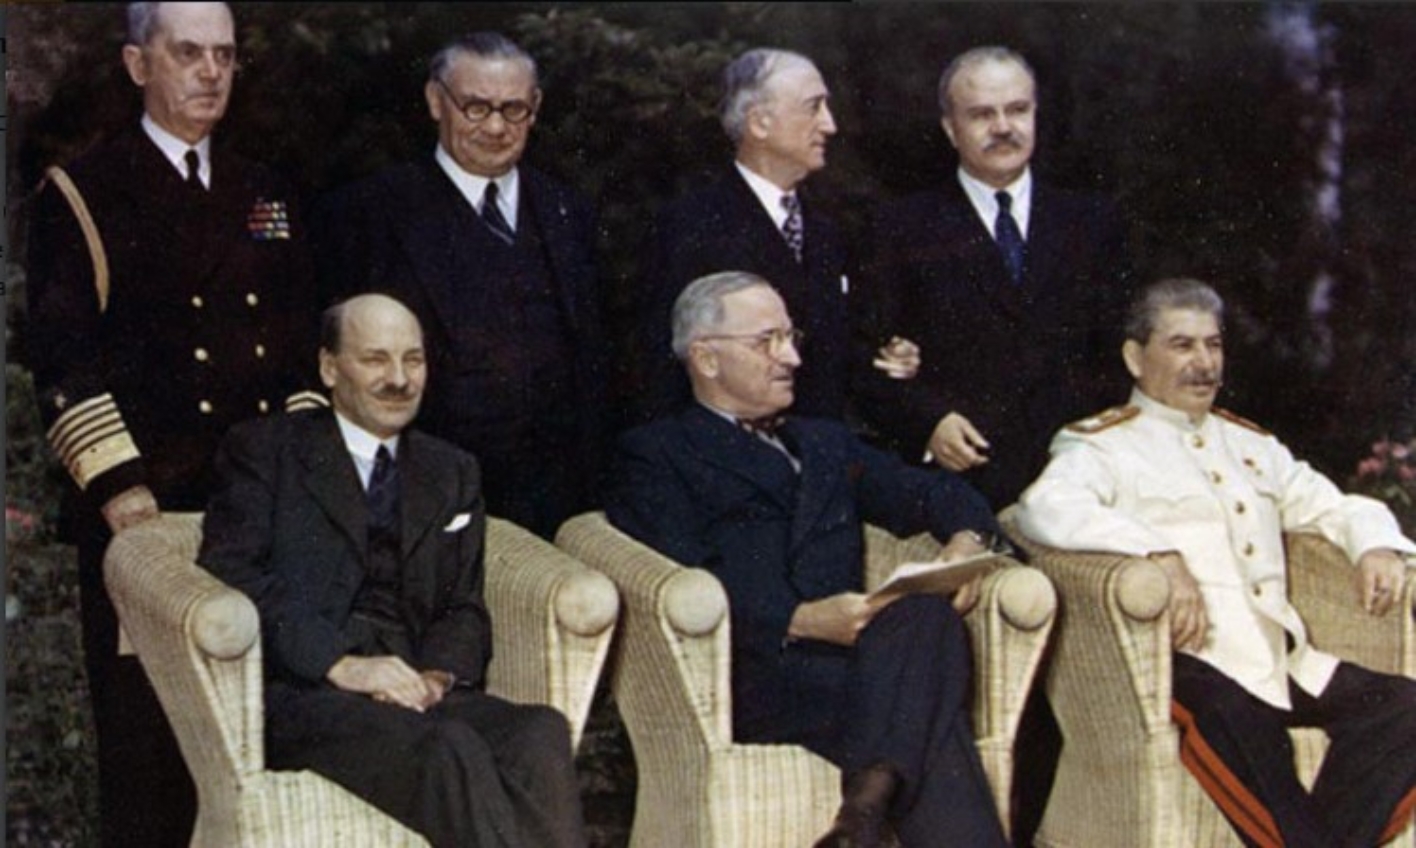 Clement Attlee, Harry S. Truman and Josef Stalin are sitting in wicker chairs. Behind them are their respective foreign ministers.